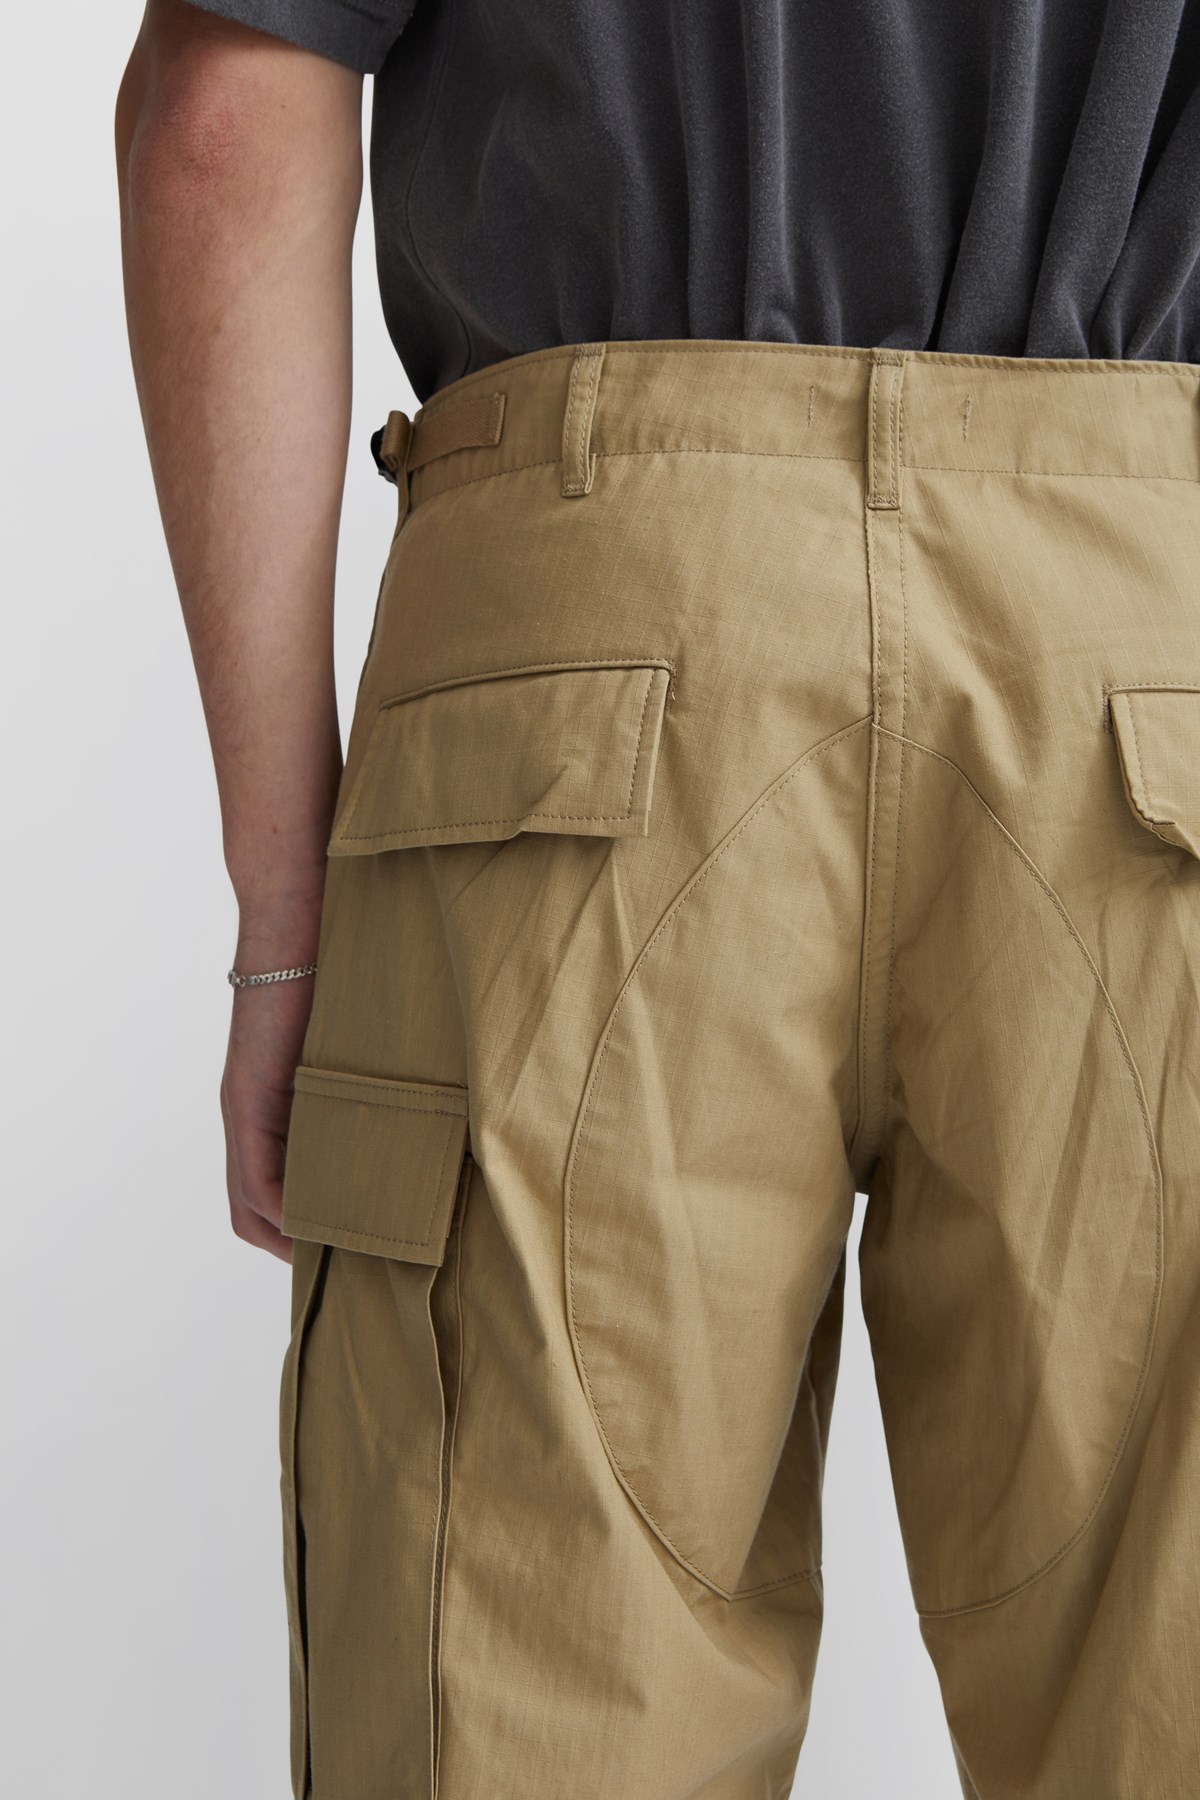 WTAPS WMILL-Trouser 01/Nyco. Ripstop Beige | WoodWood.com